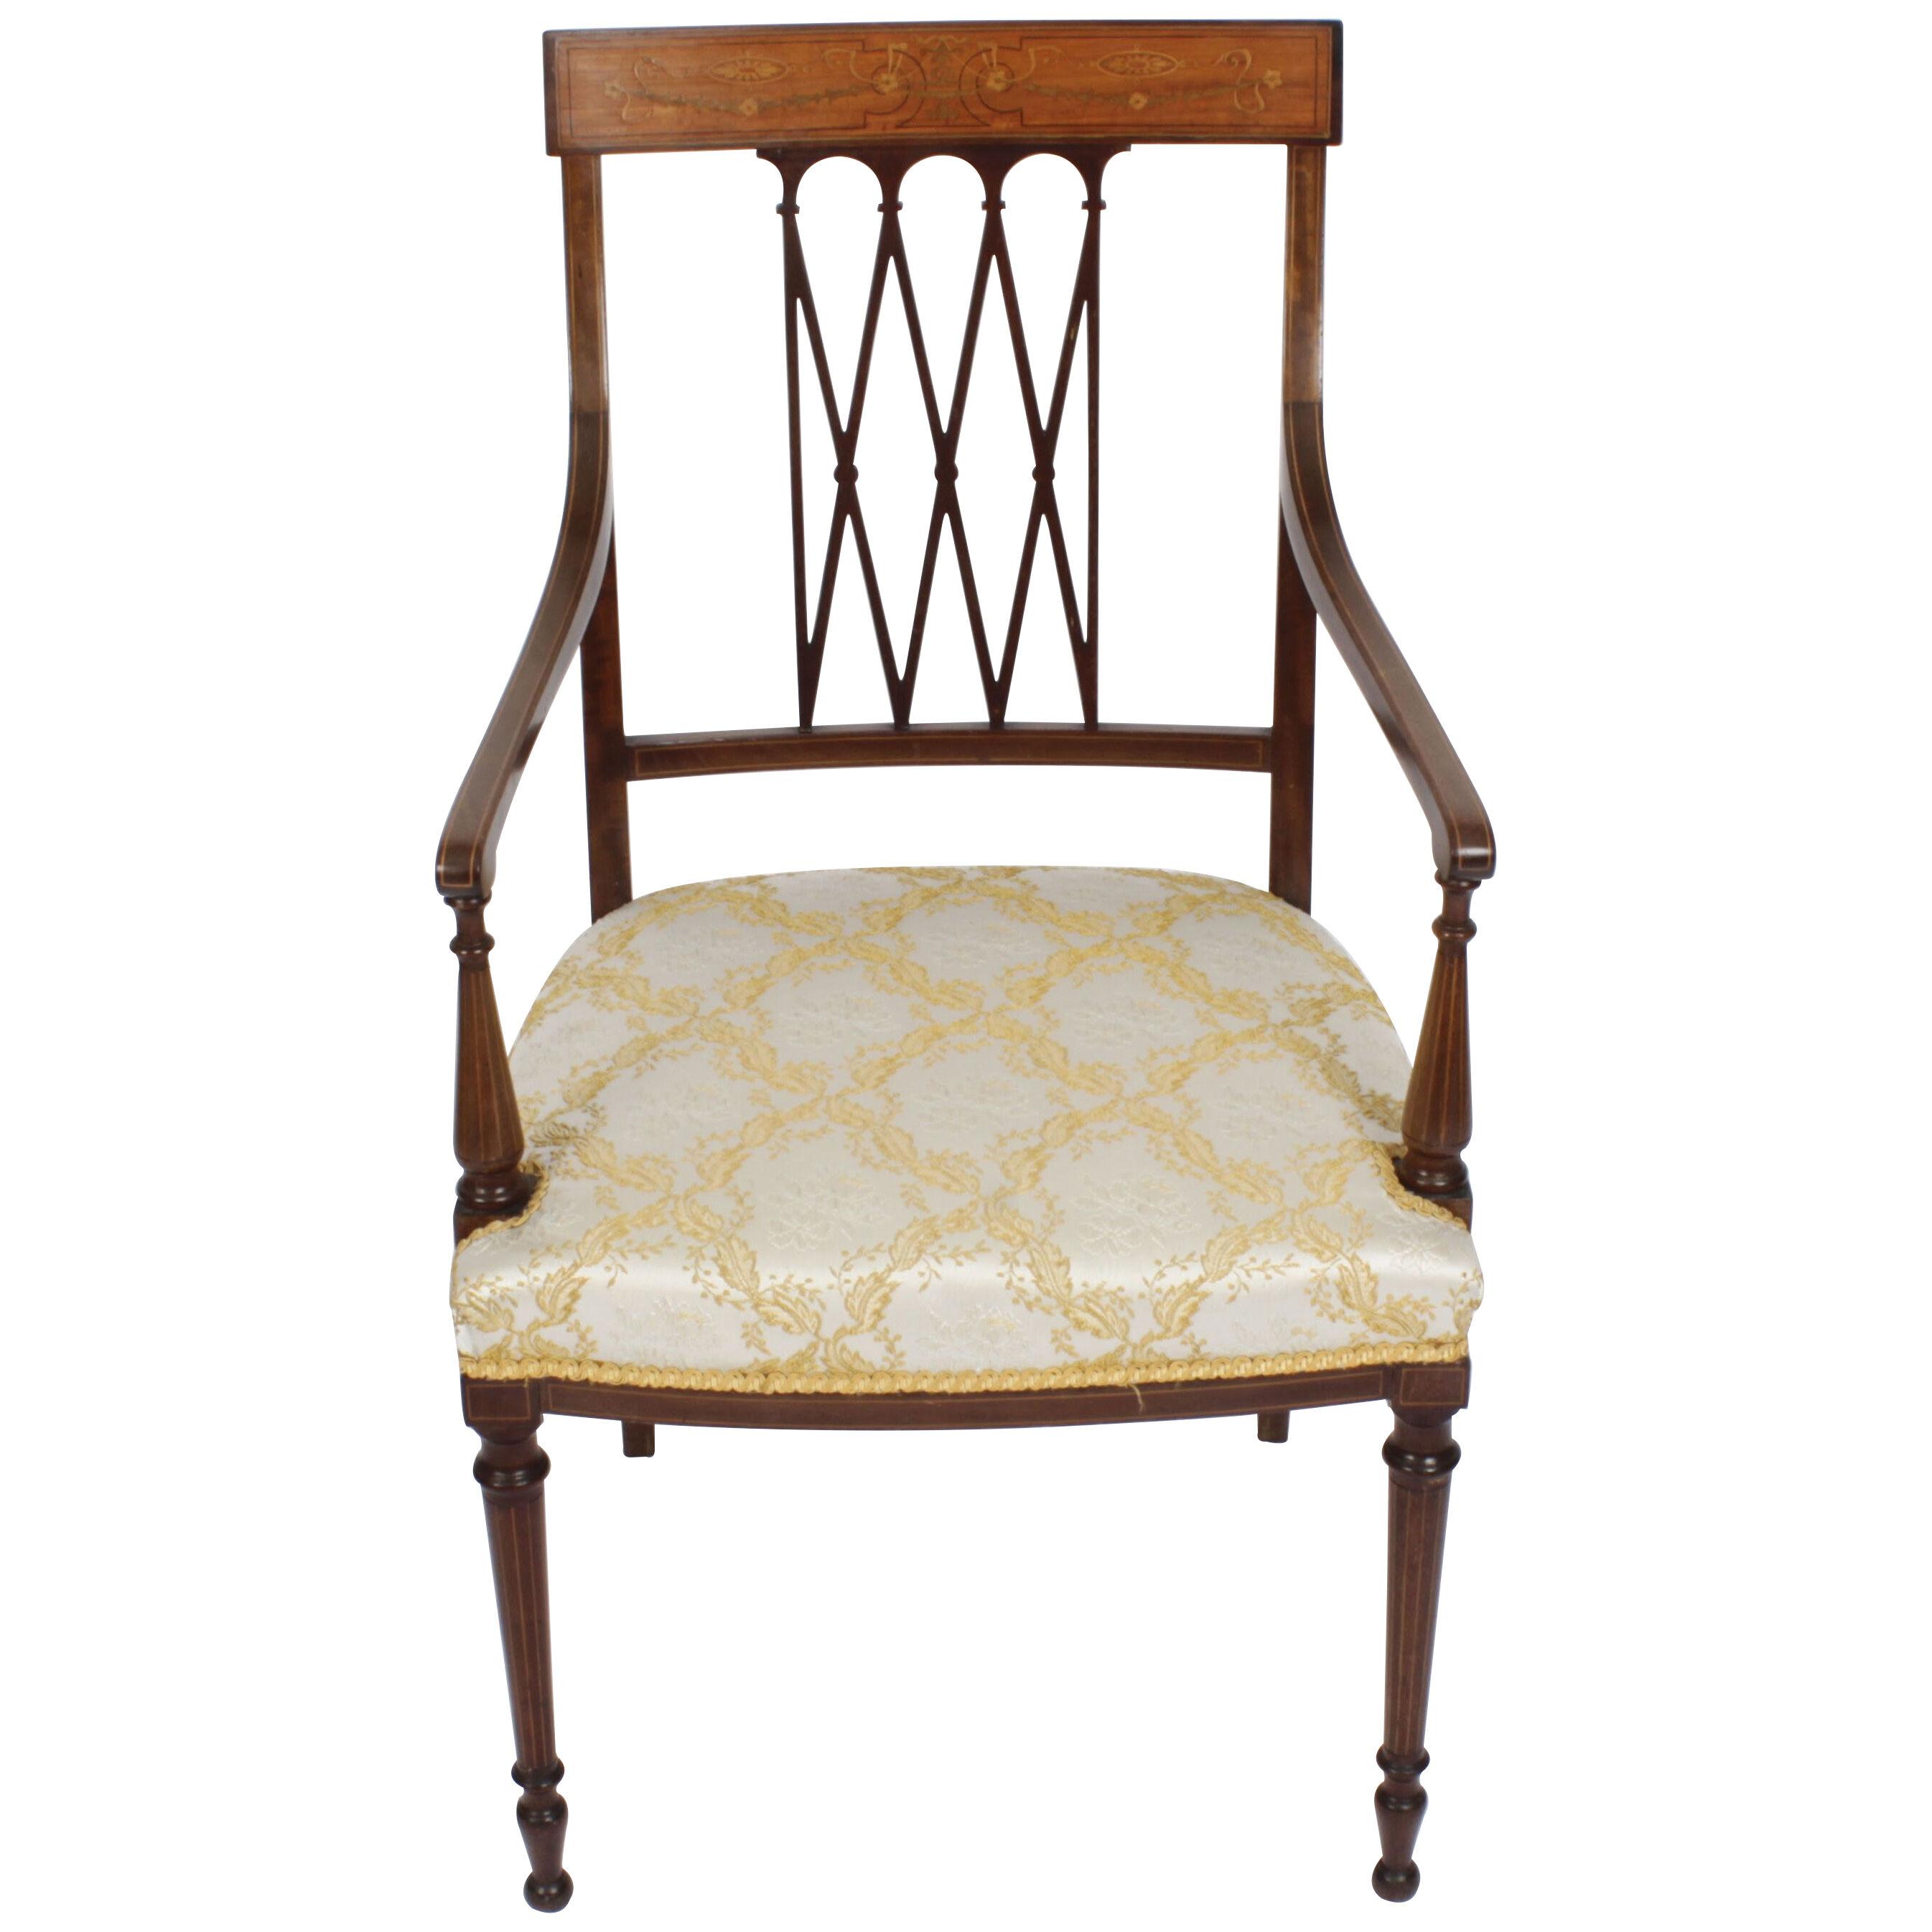 Antique Sheraton Revival Armchair by Maple & Co C1880 19th C